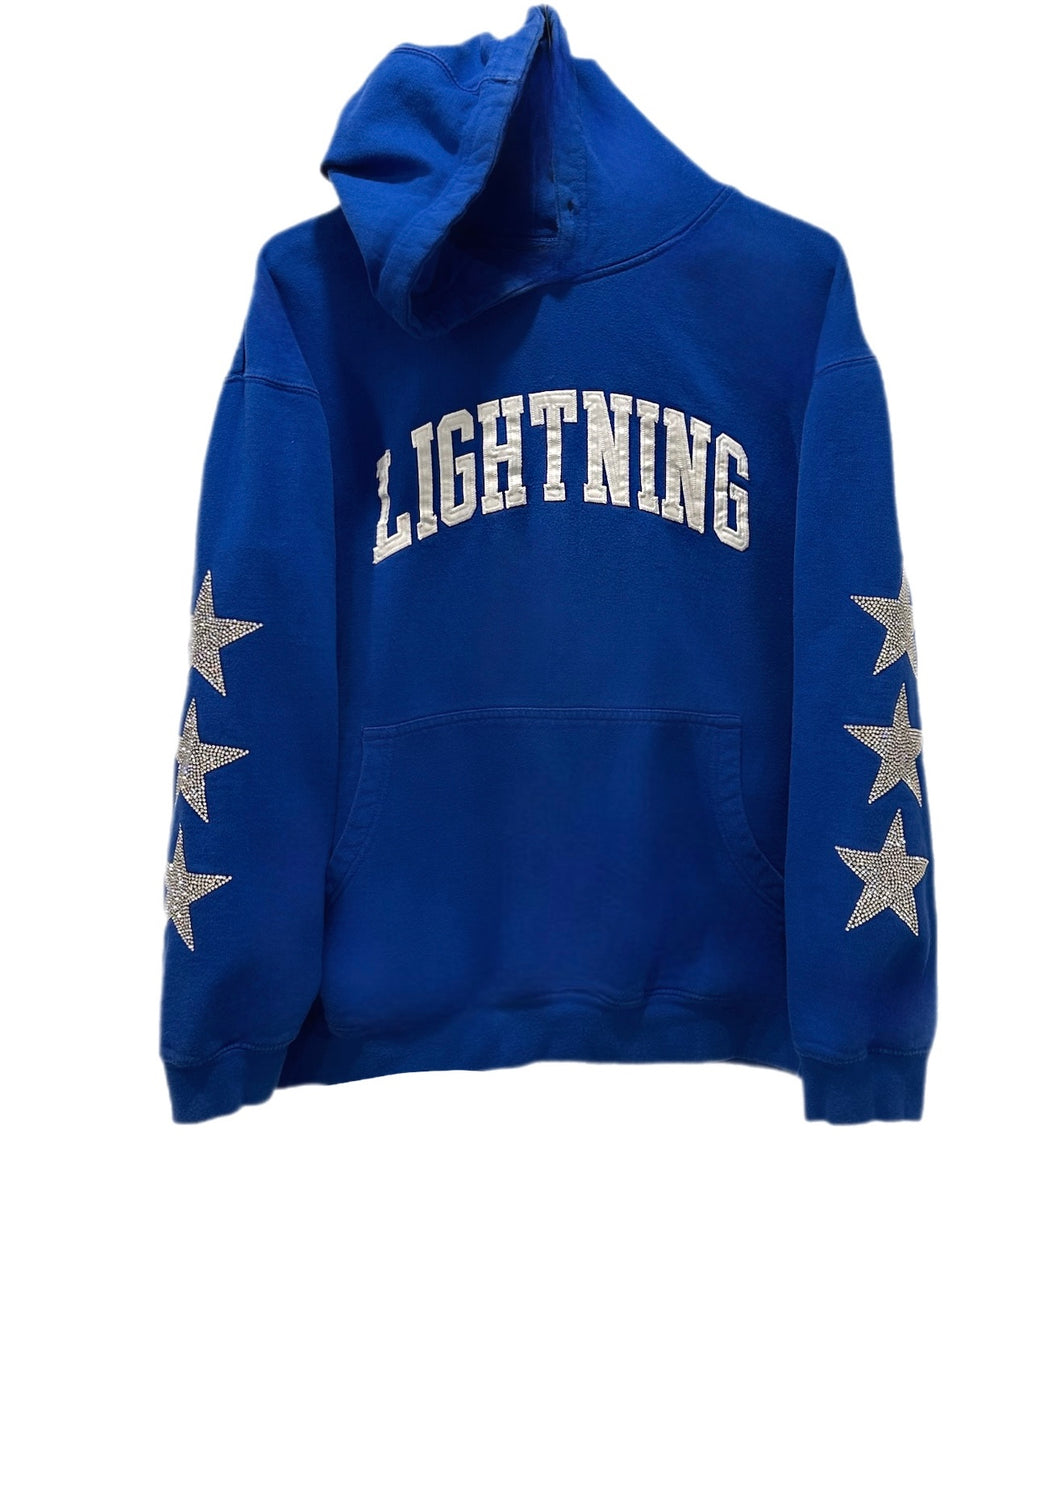 Tampa Bay Lightning, NHL One of a KIND Vintage Hoodie with Three Crystal Star Design